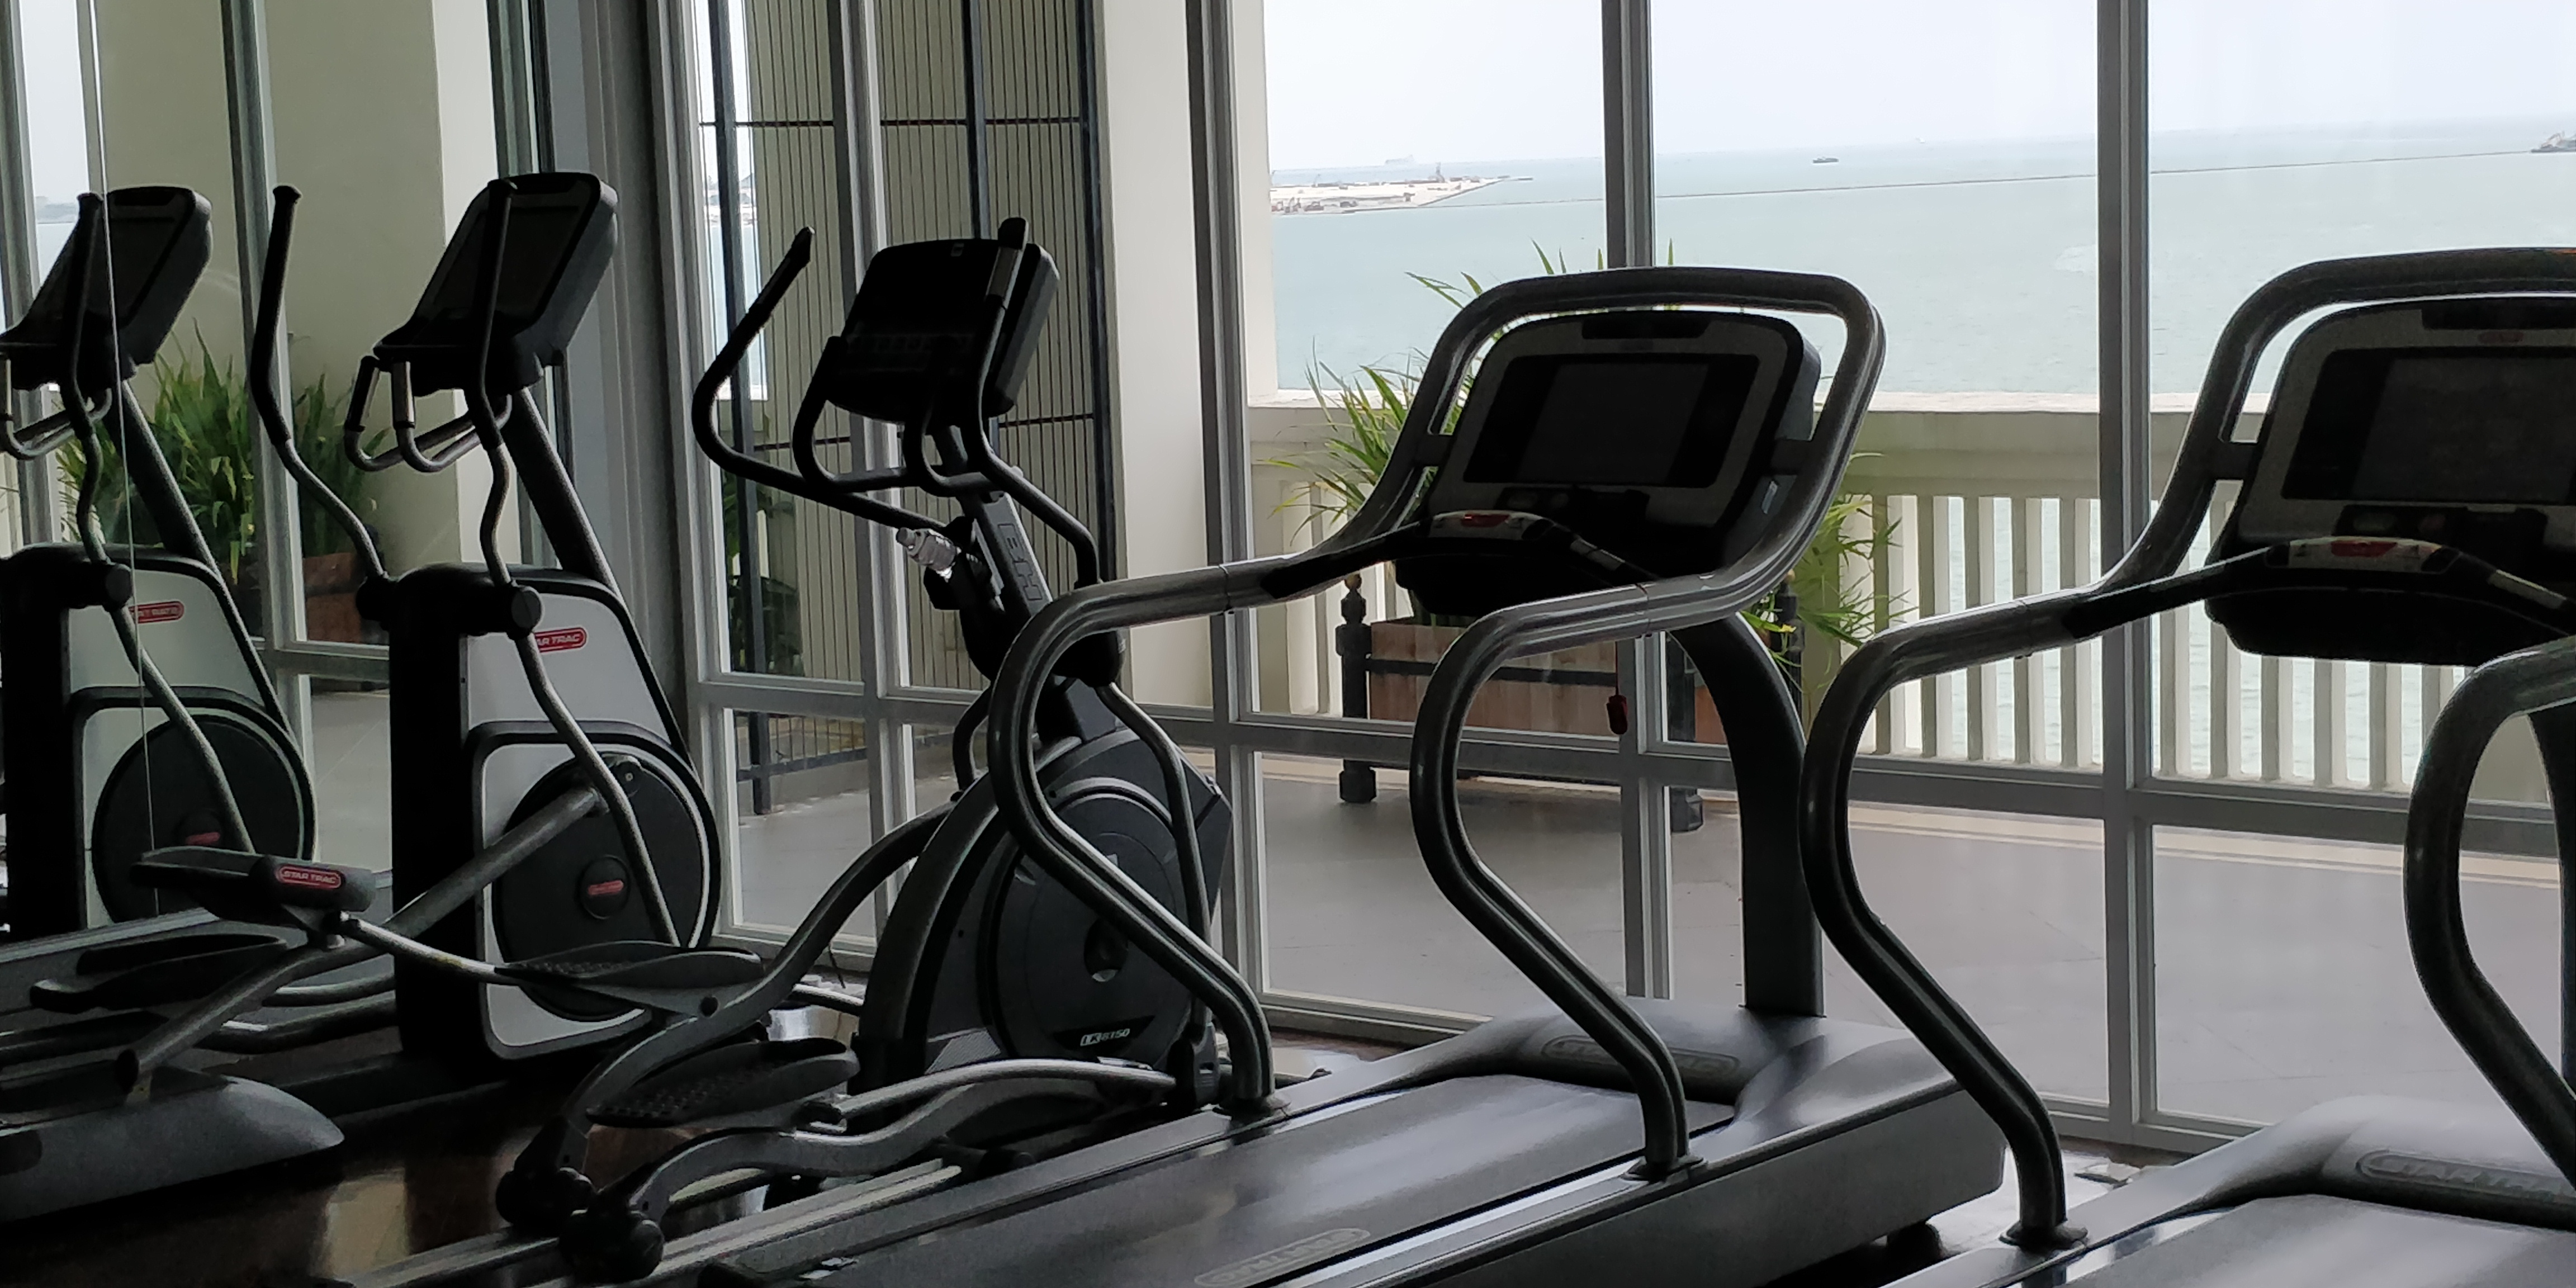 A PICTURE OF CARDIO EQUIPMENT OVERLOOKING THE SEA